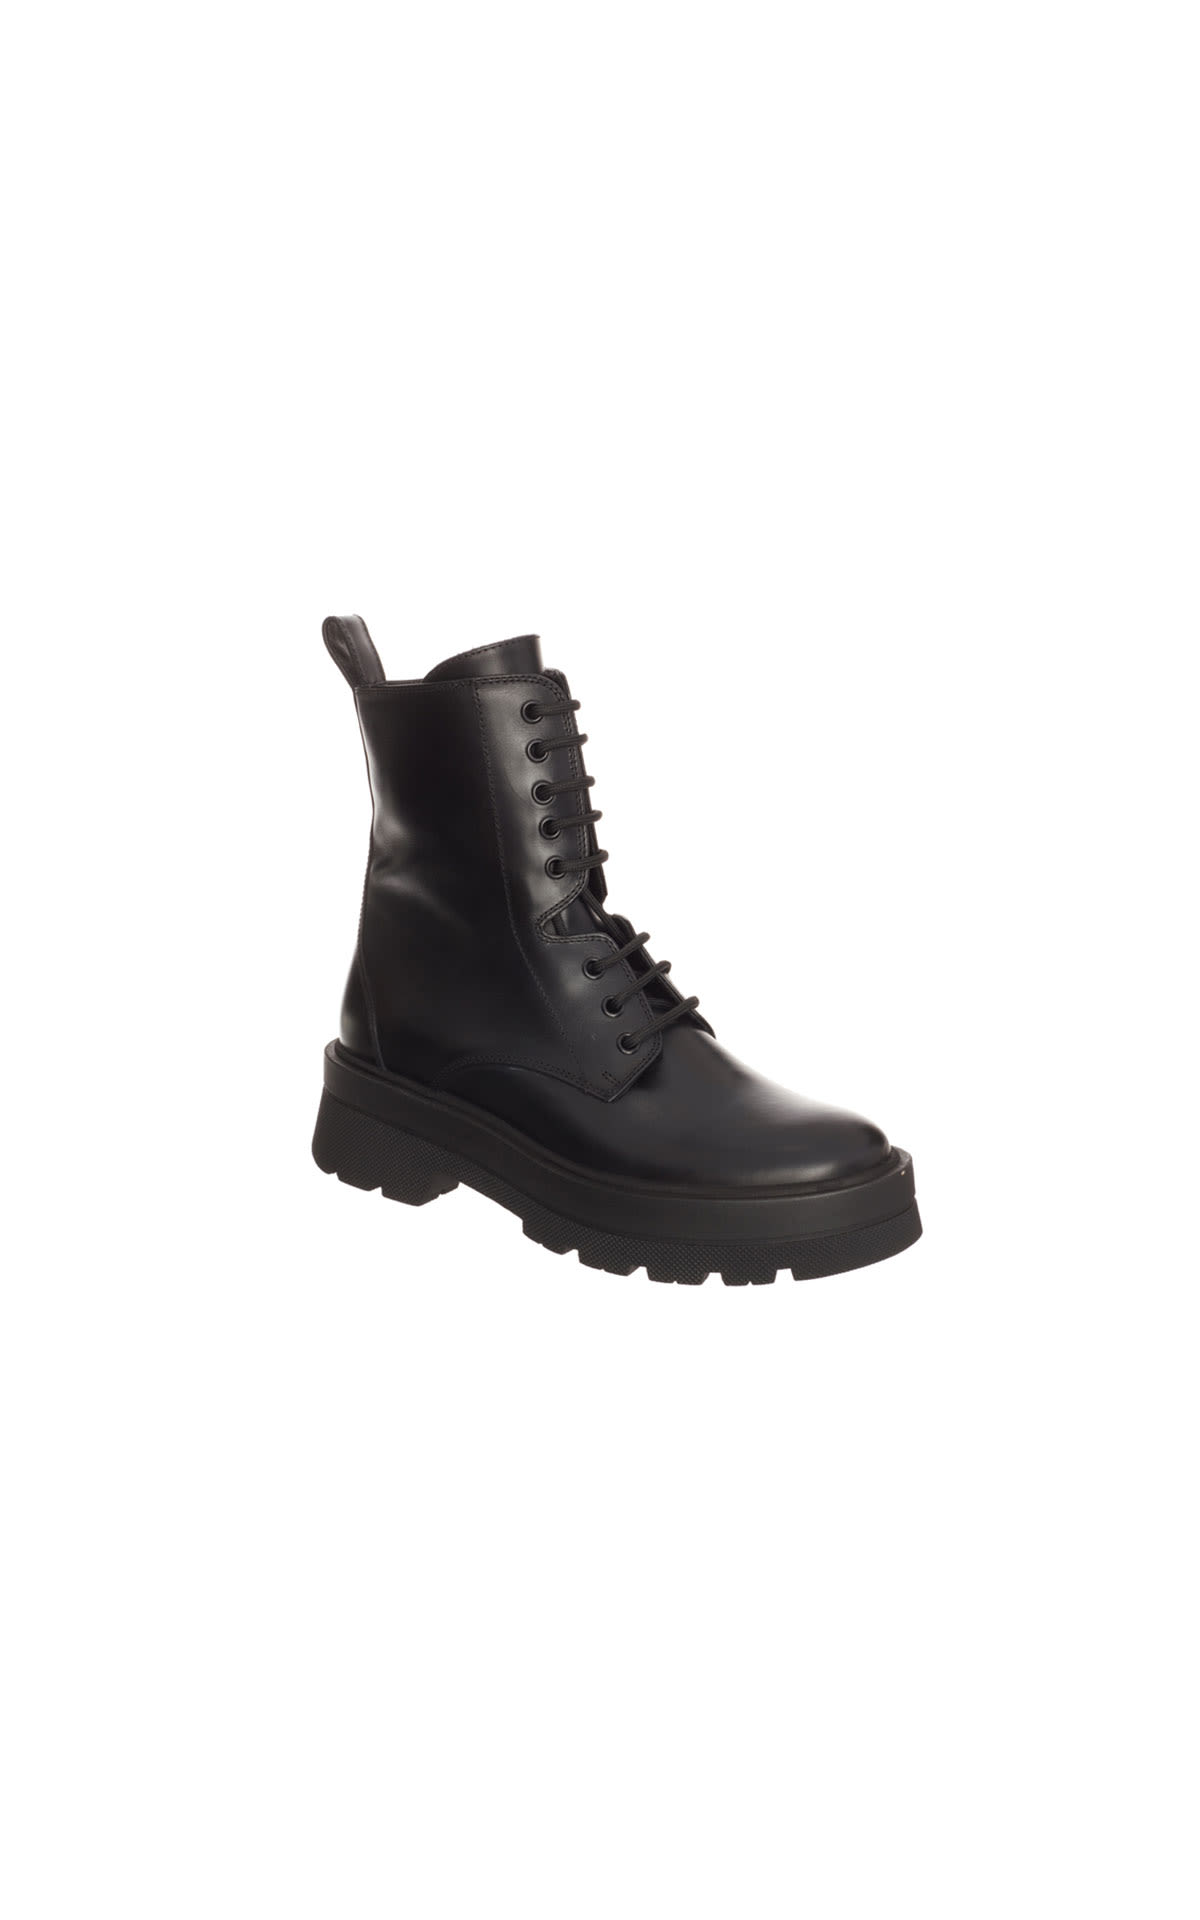 Boss Lace up boots from Bicester Village